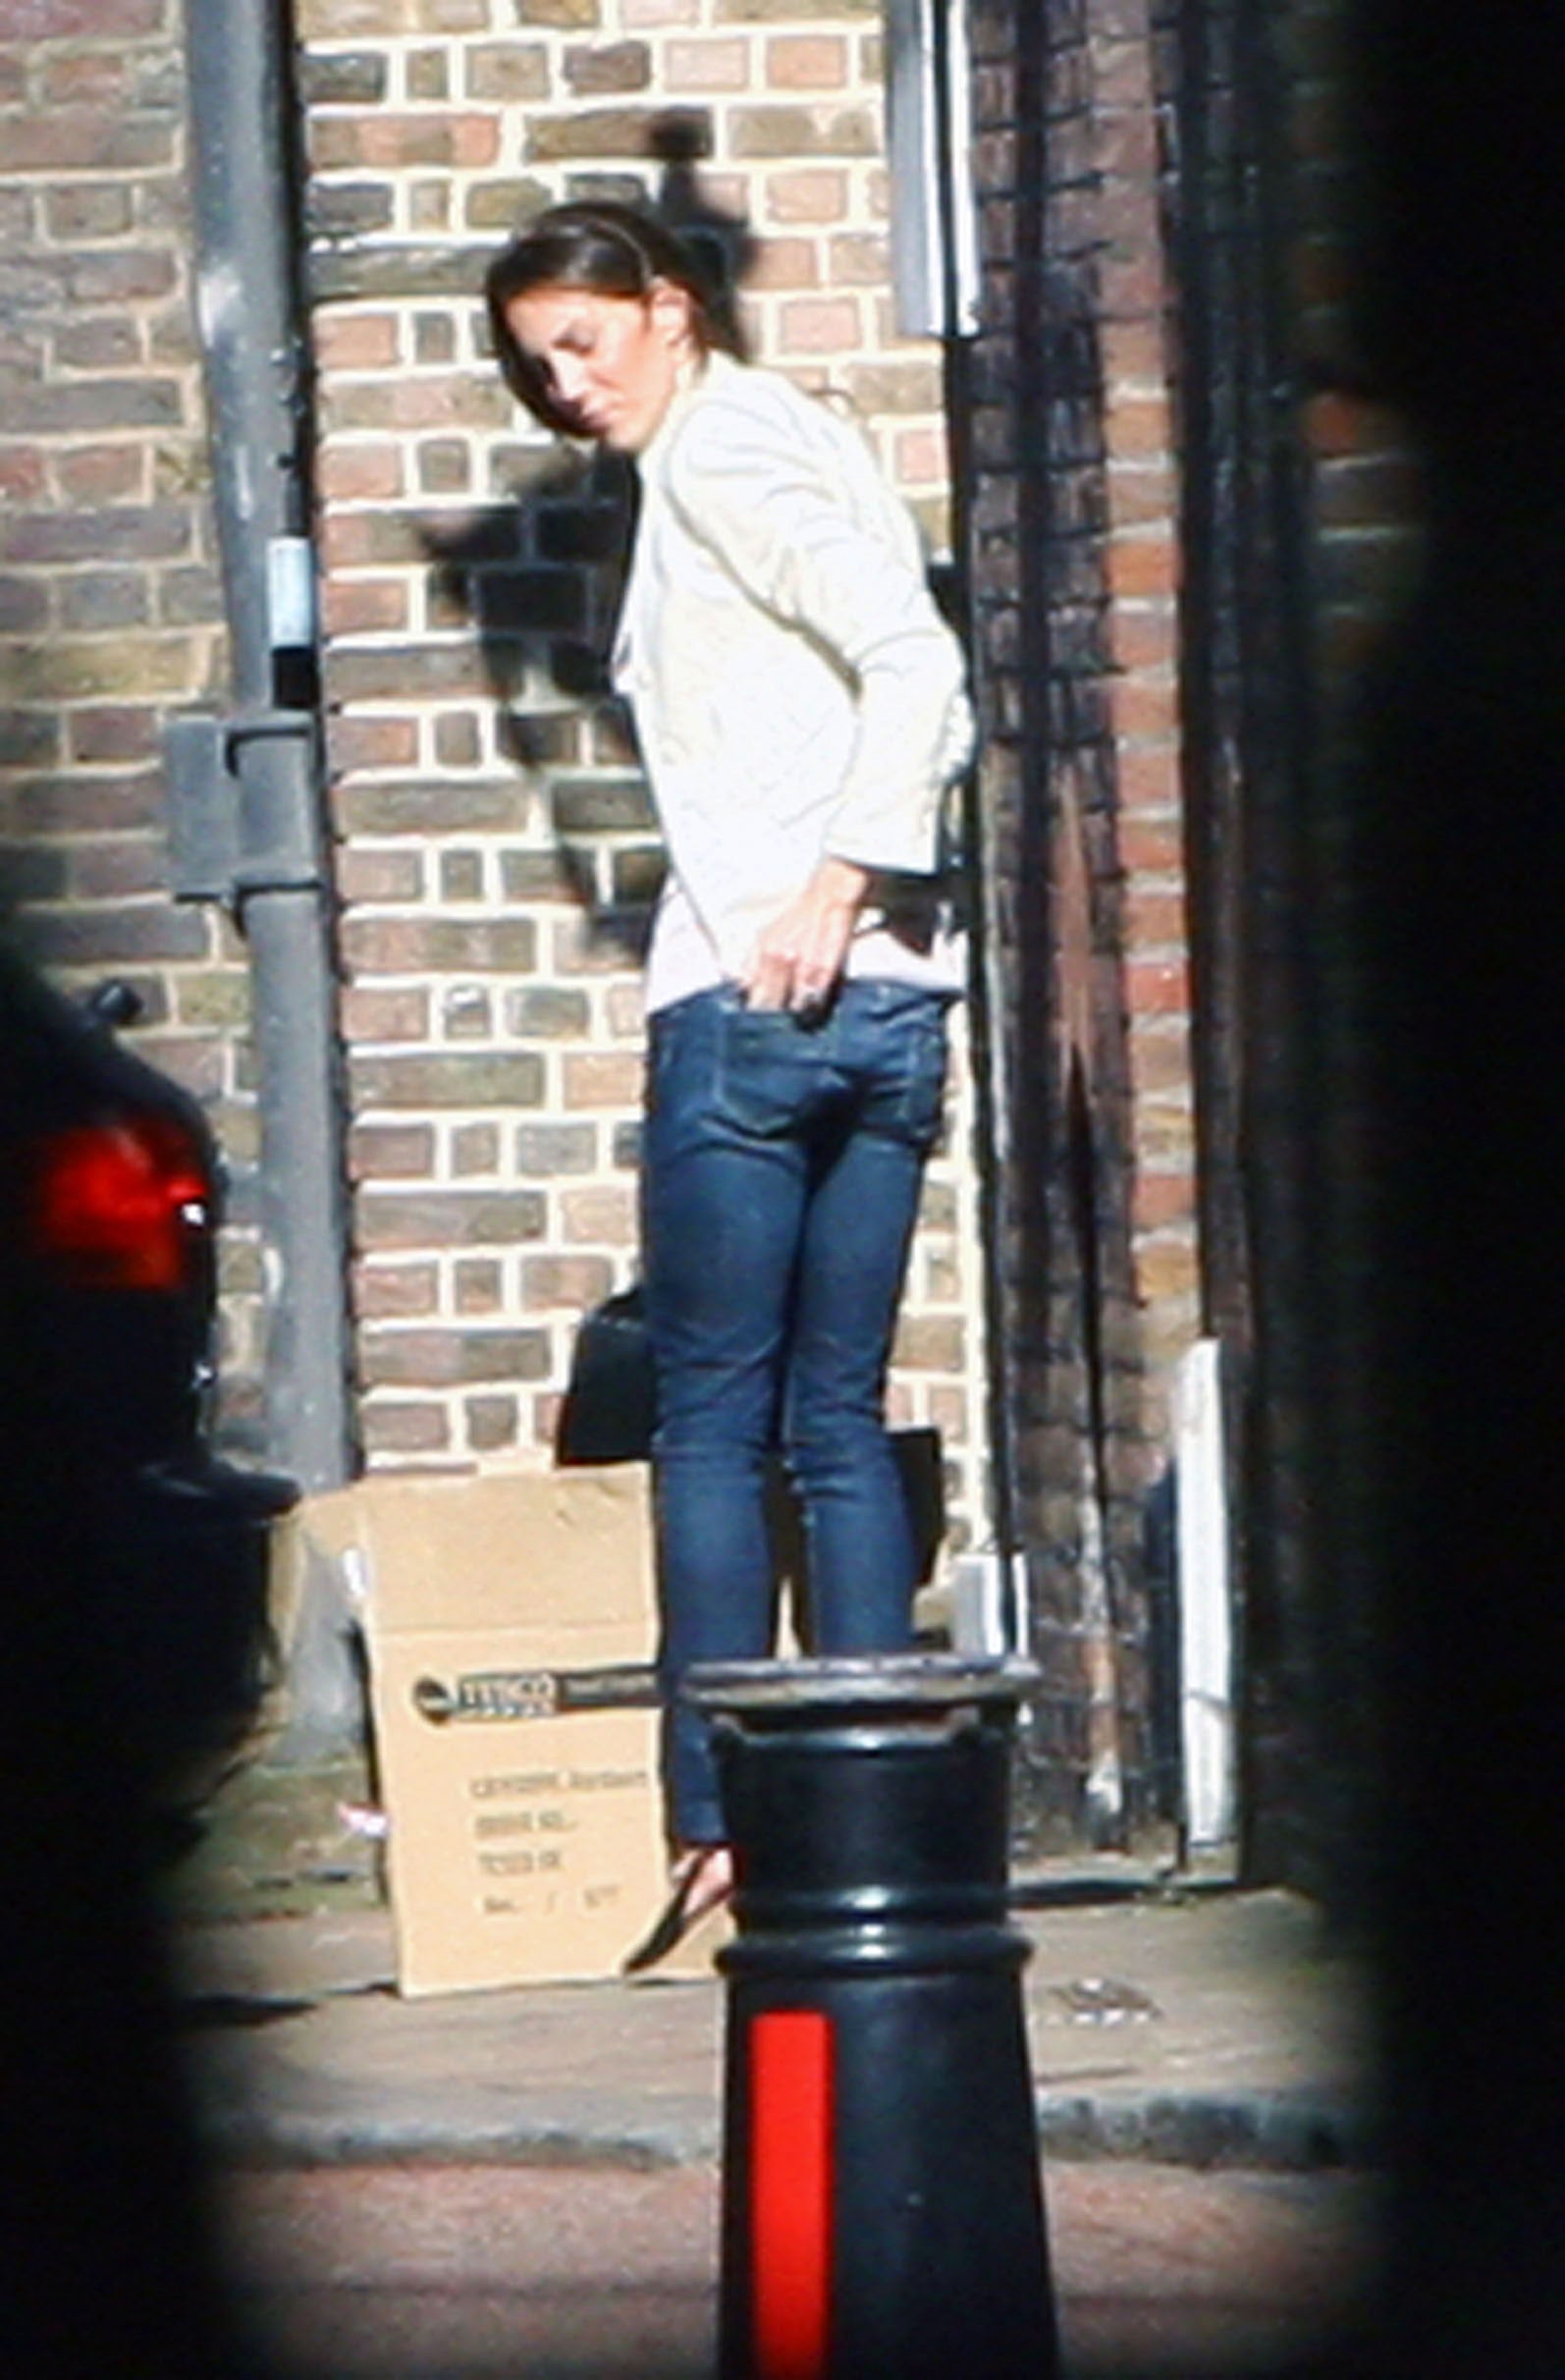 NEW PICS: Two Days Before Wedding, Kate Middleton Spotted Moving Boxes